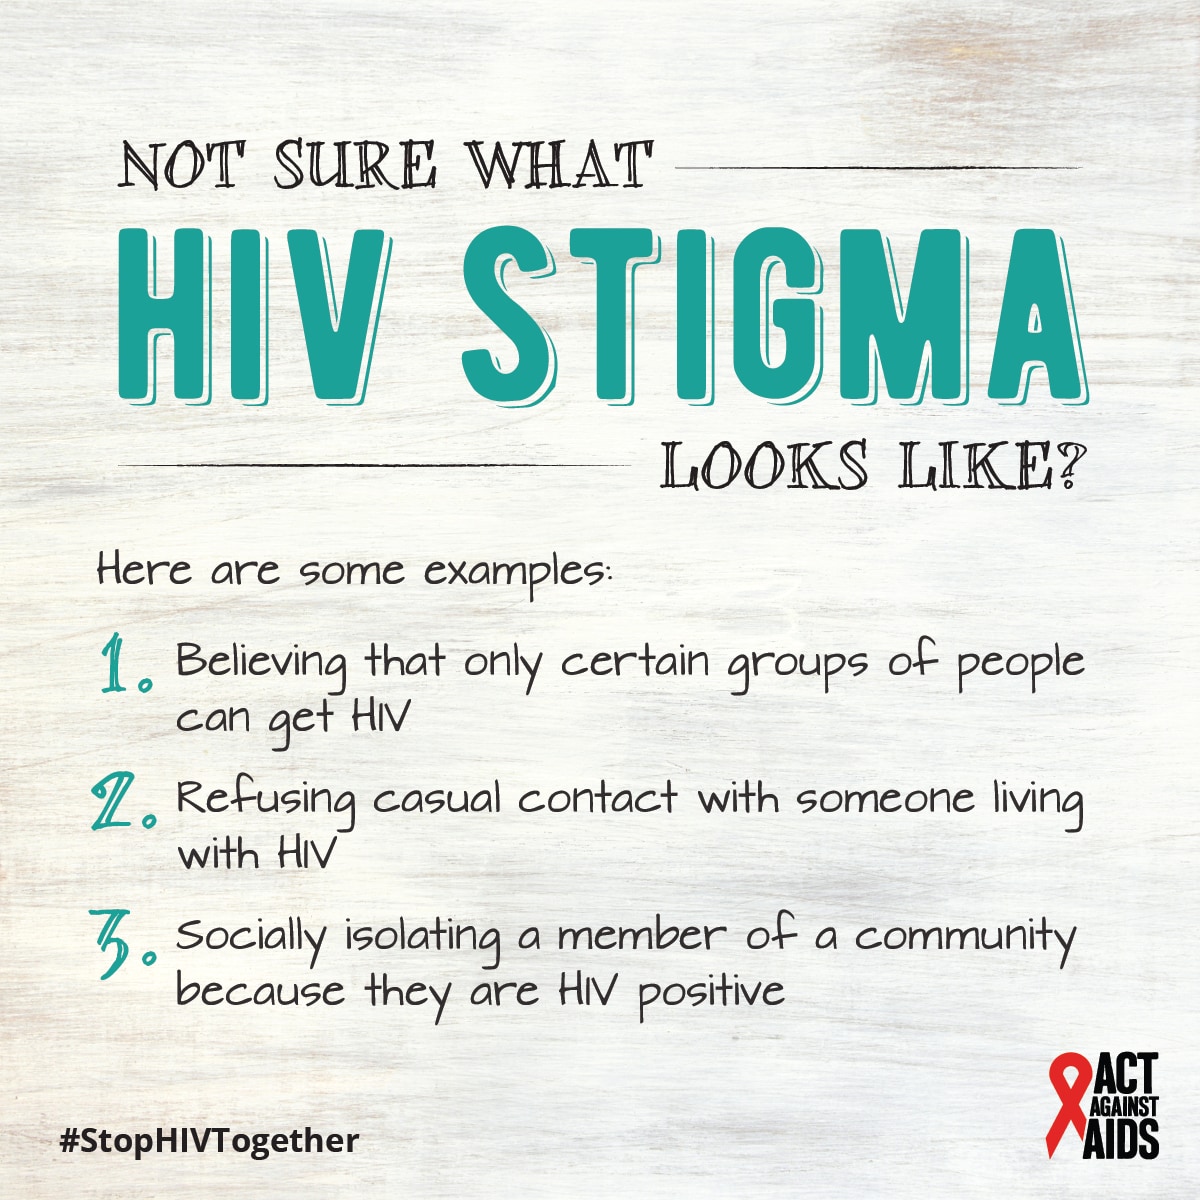 Not sure what HIV stigma looks like? Here are some examples: 1. Believing that only certain groups of people can get HIV 2. Refusing casual contact with someone living with HIV 3. Socially isolating a member of a community because they are HIV positive. #StopHIVTogether Act Against AIDS